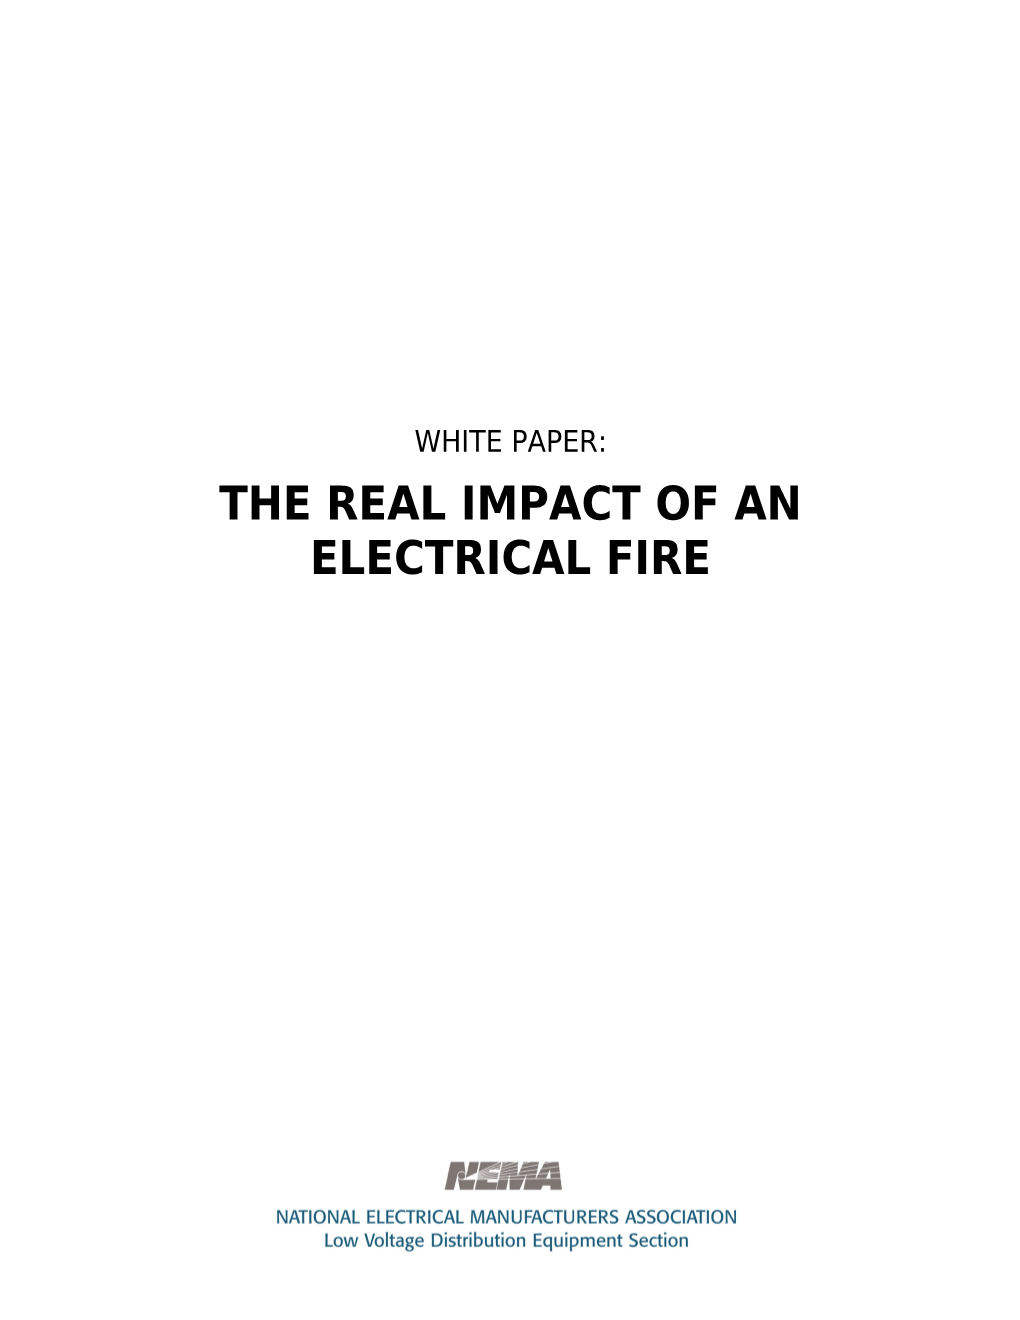 The Real Cost of an Electrical Fire